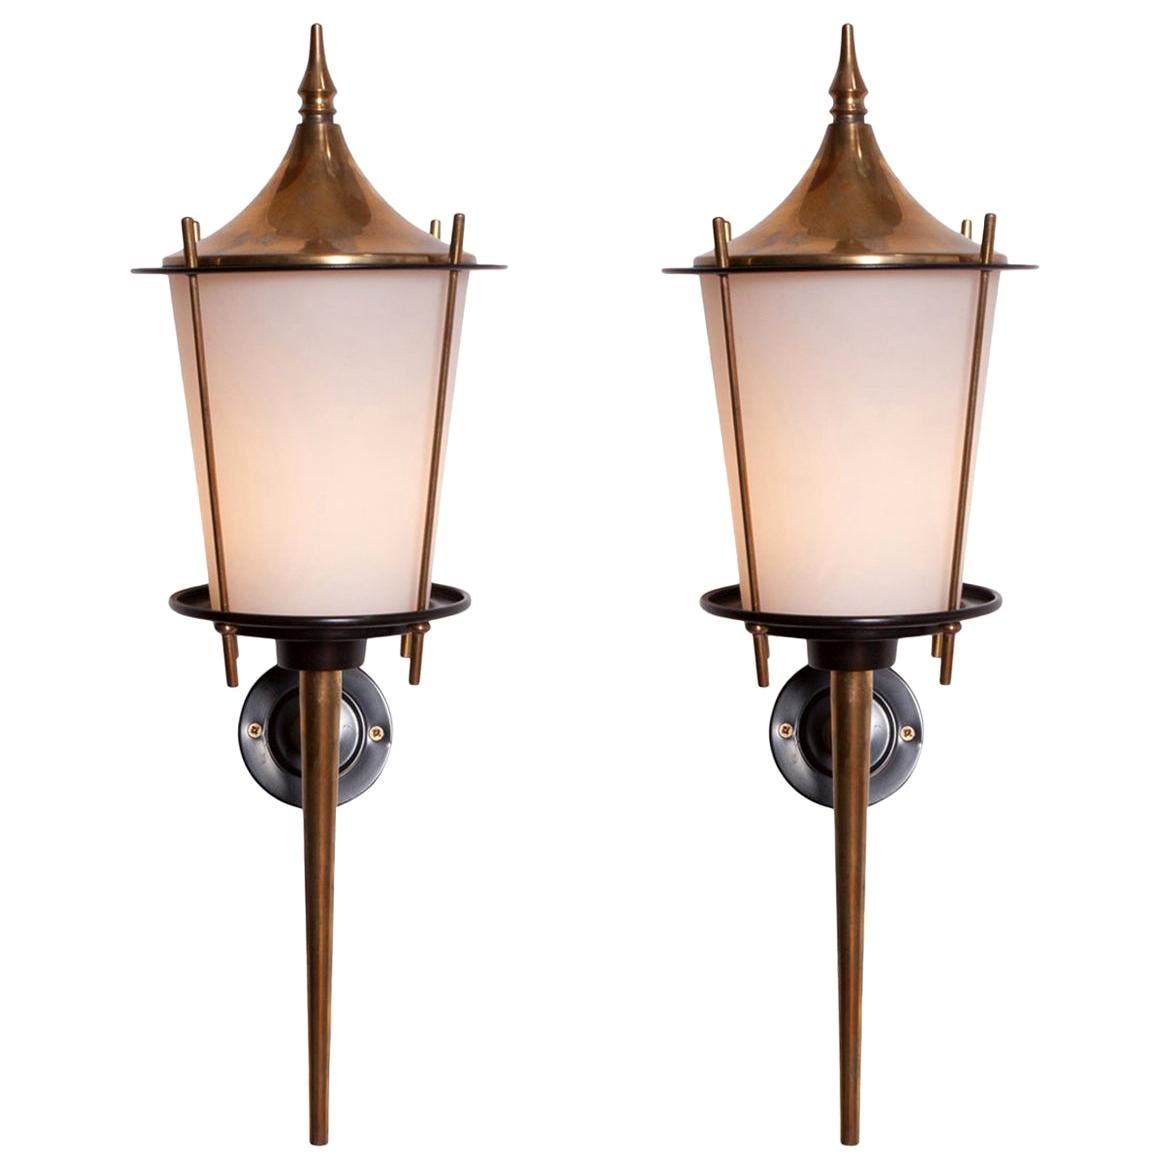 Maison Arlus produced brass lantern shaped wall lights, France, 1970s.
The opaline glass shades provide the light with an elegant and soft light partition. 

    
 